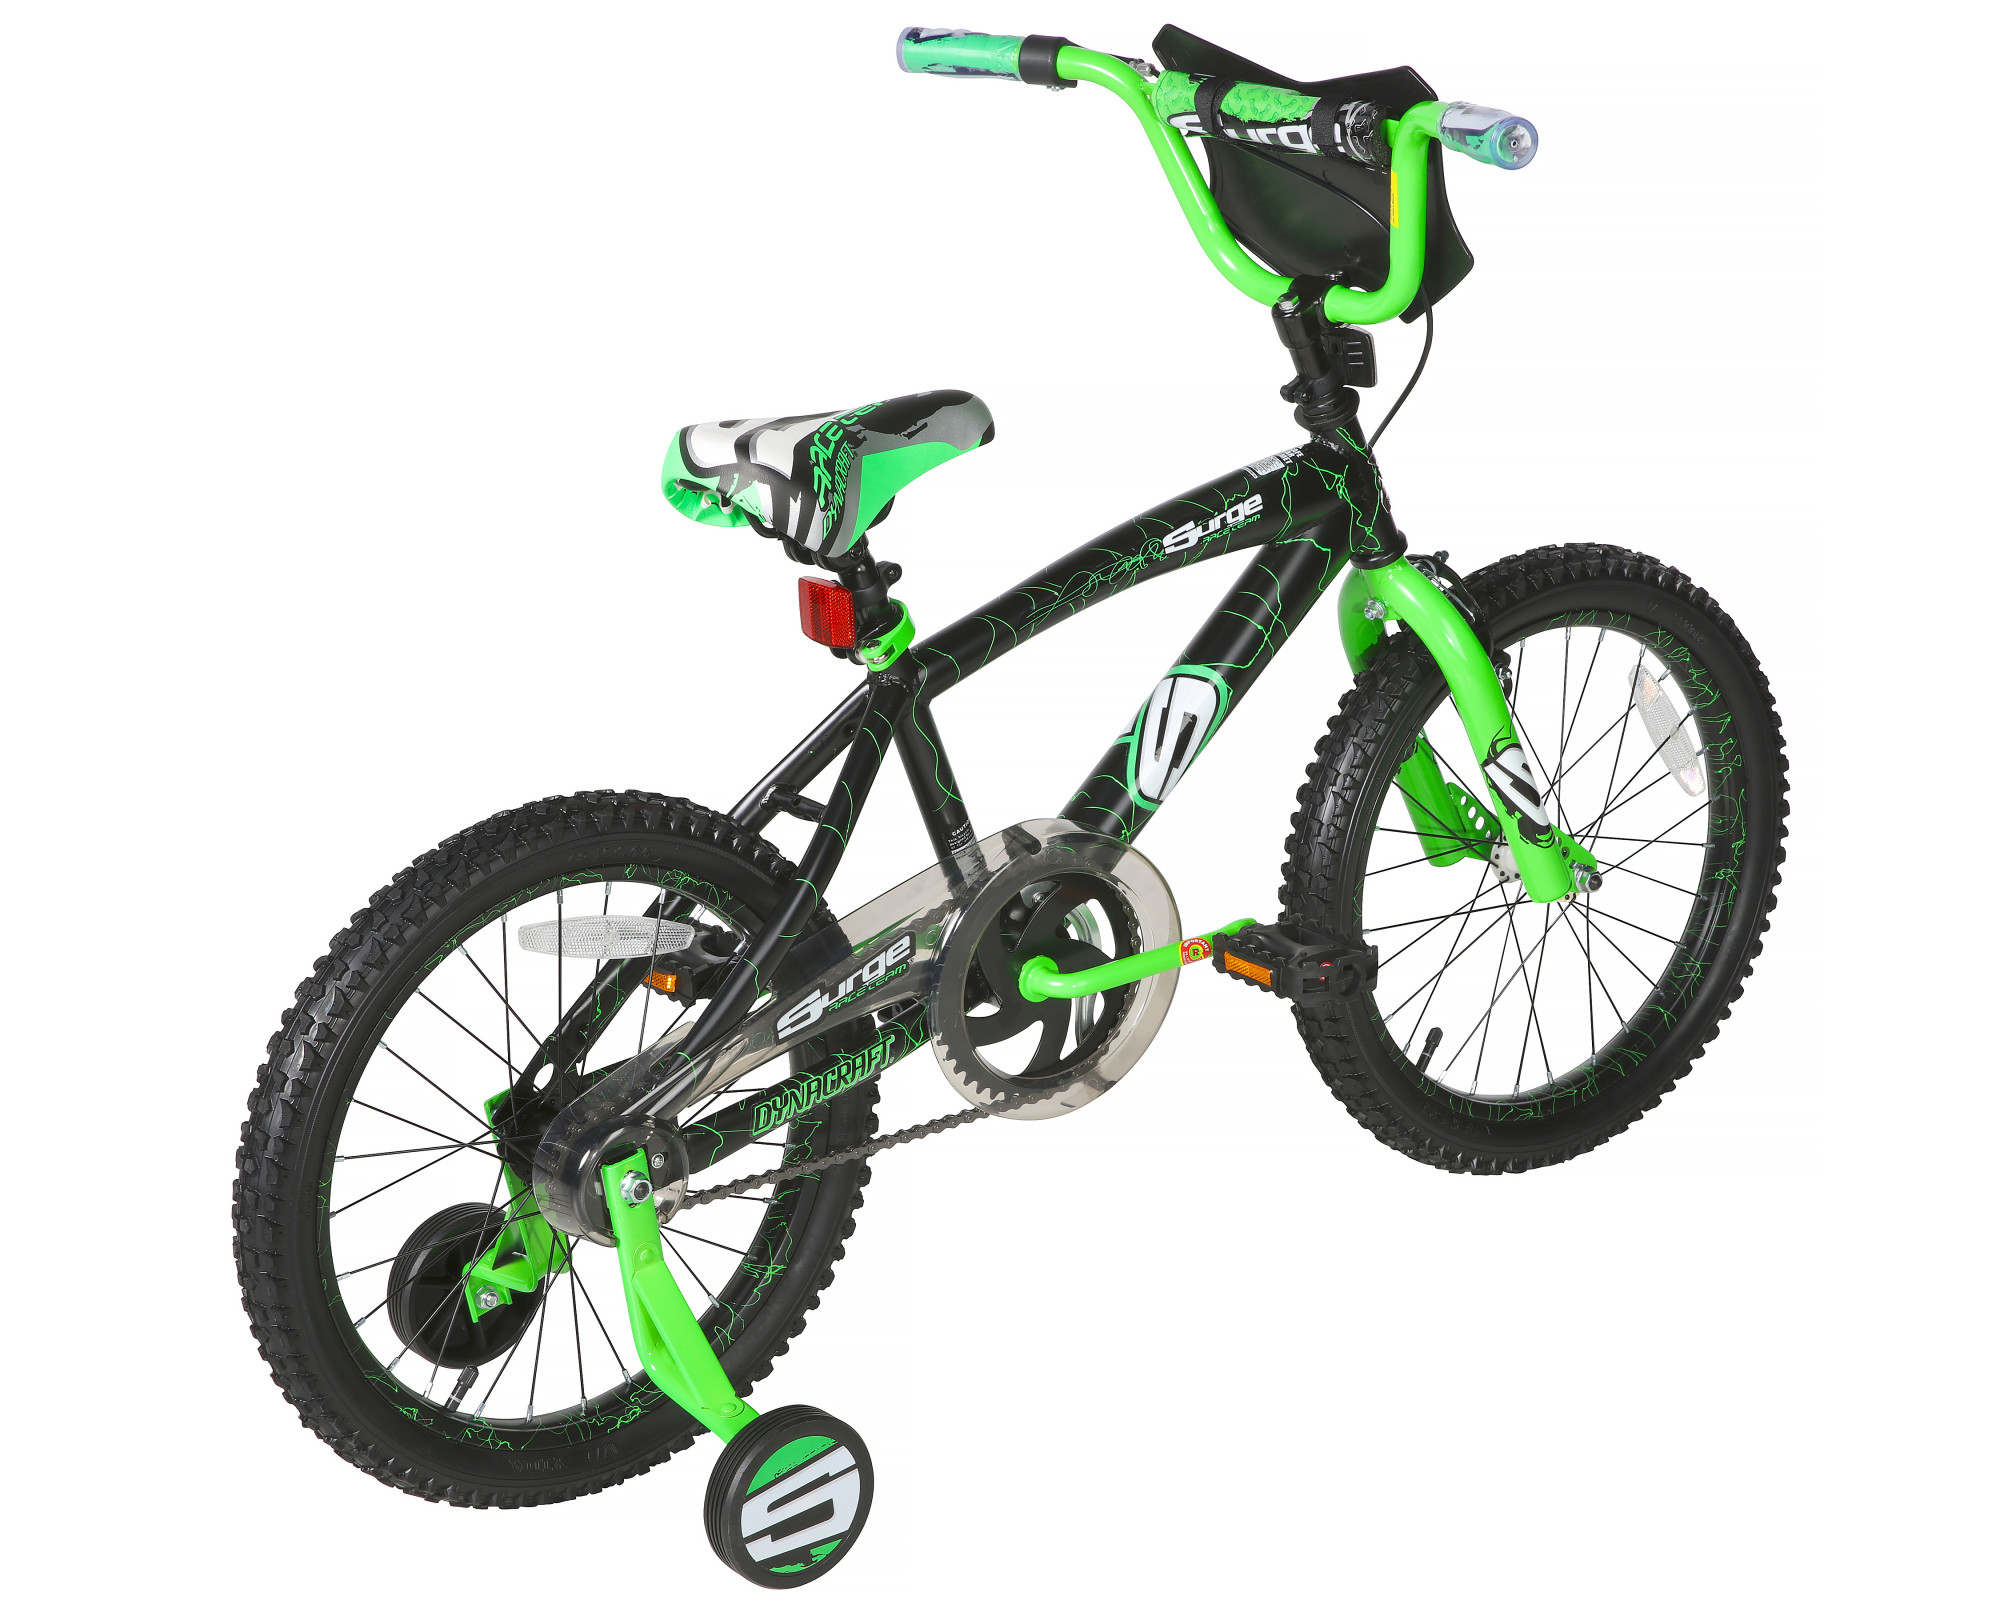 Dynacraft Surge18-inch Boys BMX Bike for Children Age 6-9 years - image 4 of 12